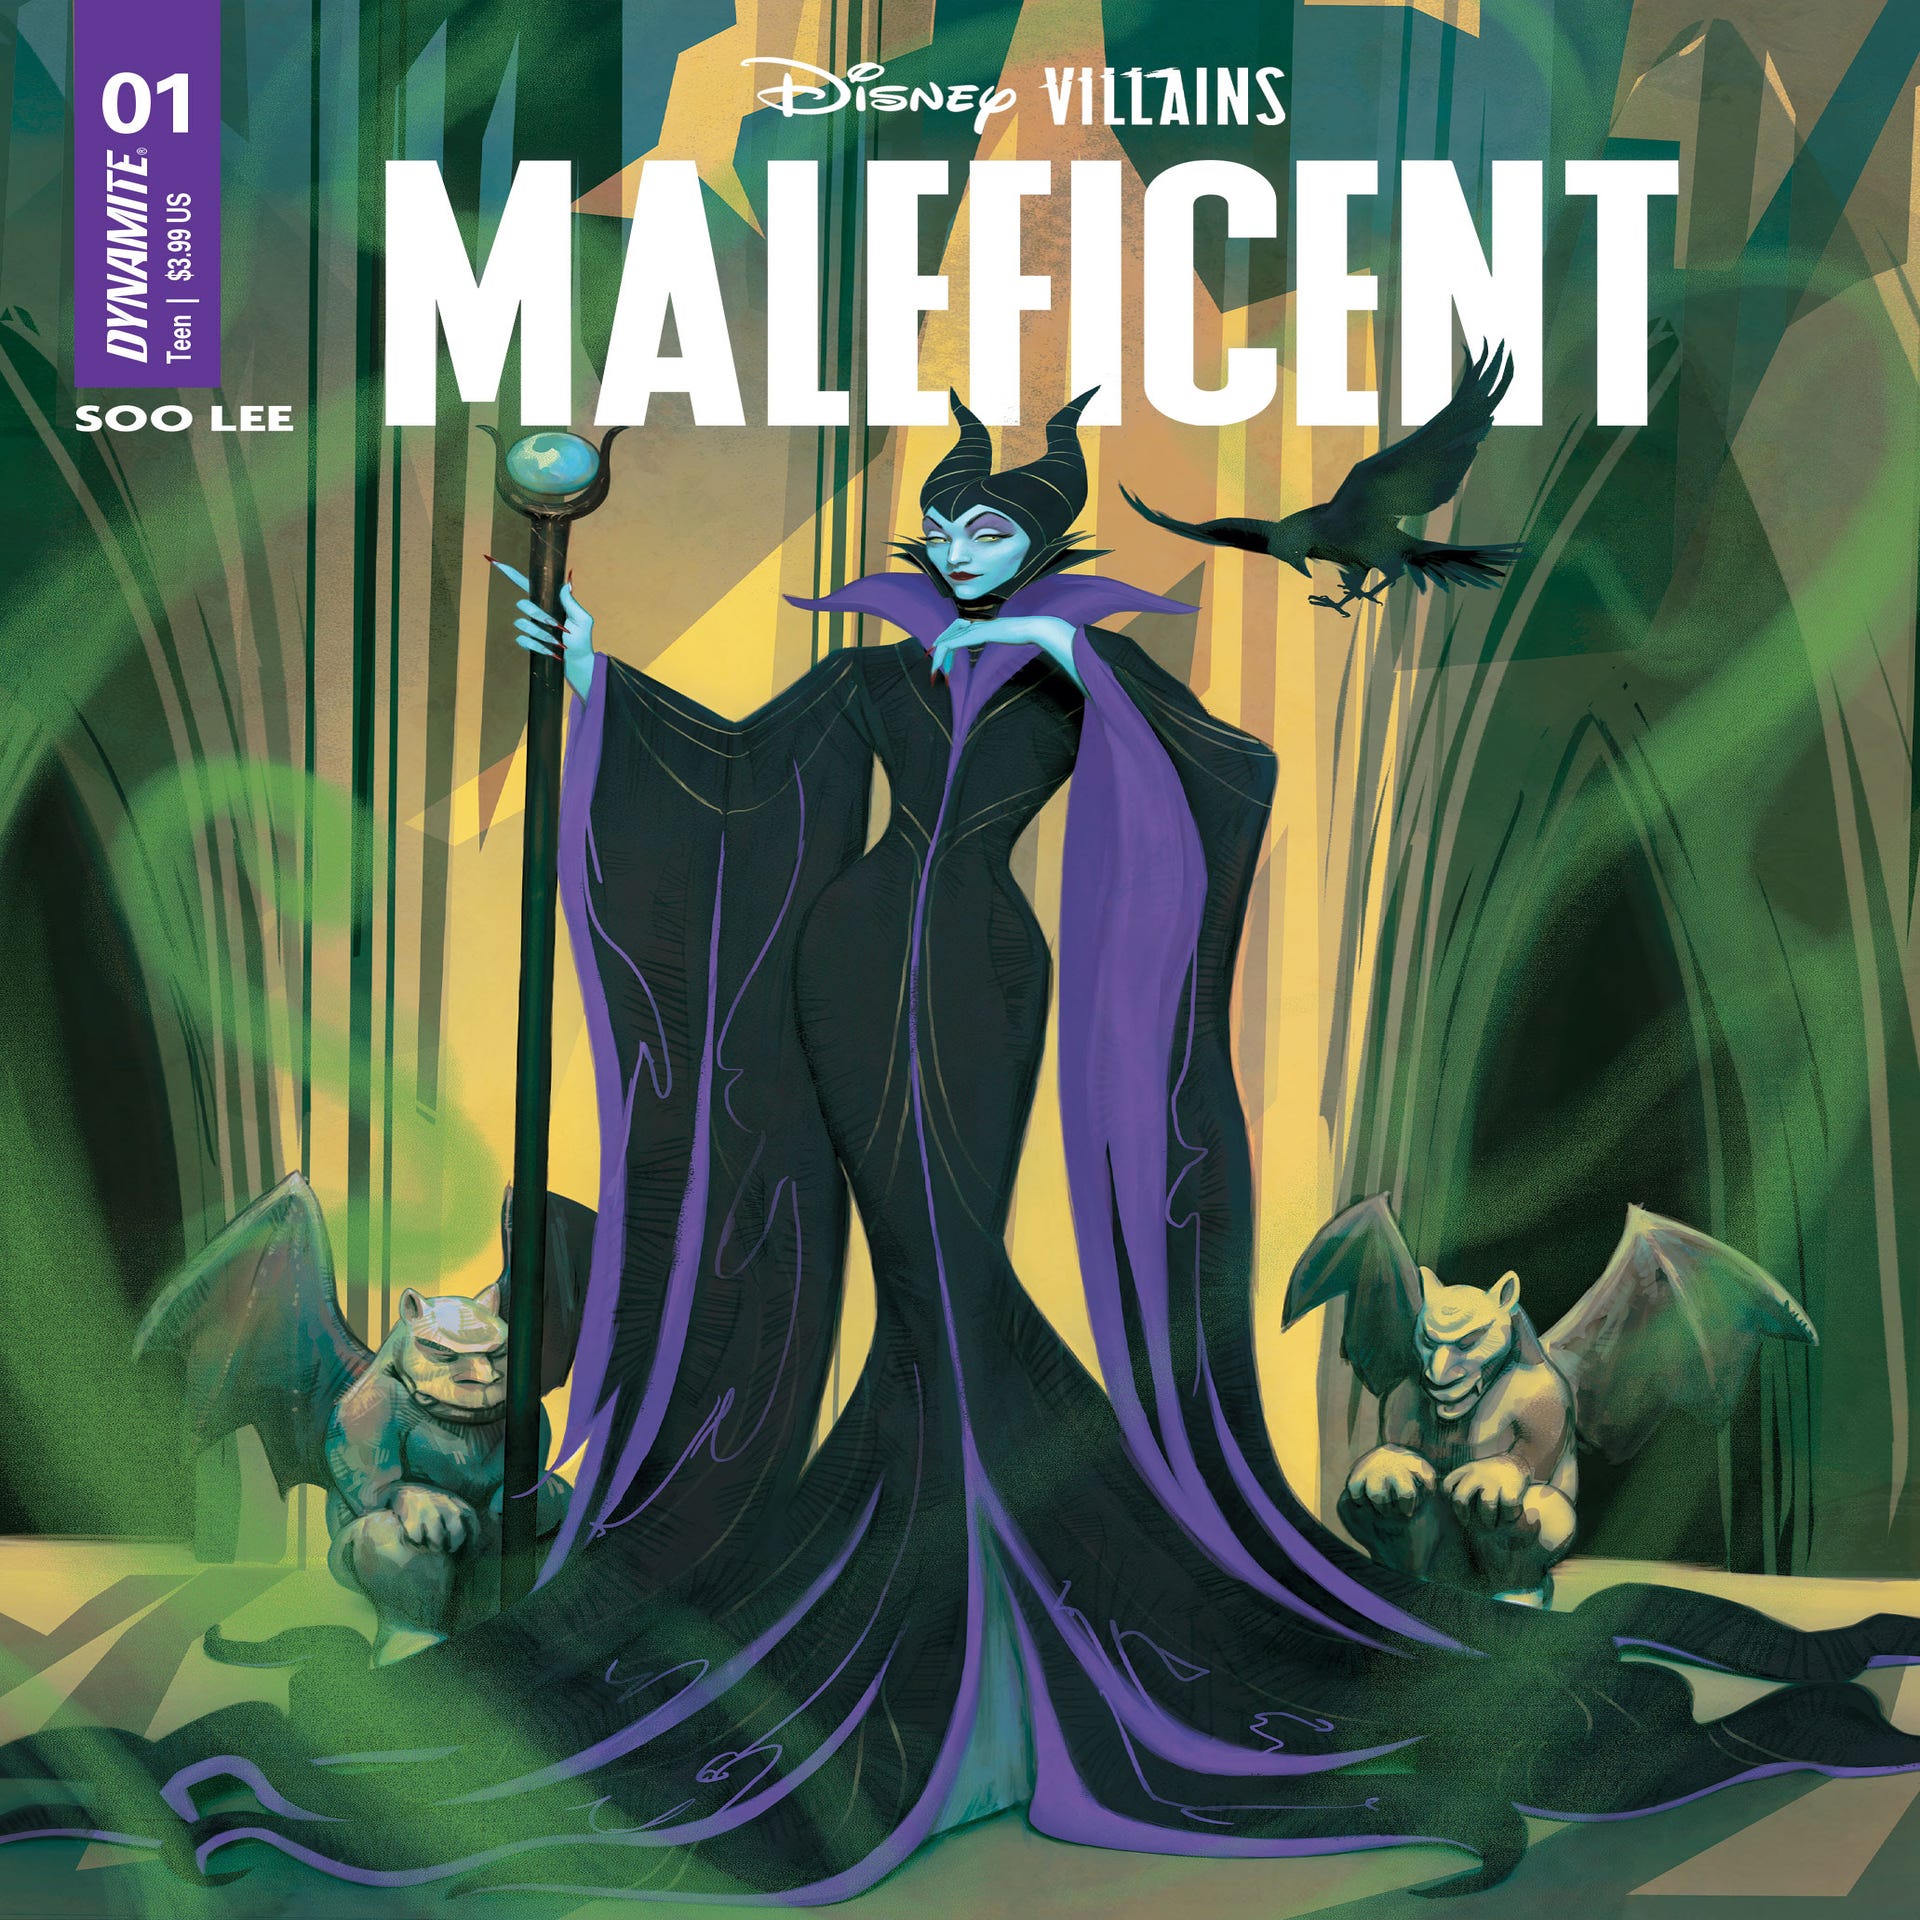 Maleficent is coming to comic books in a prequel to Disney's classic  Sleeping Beauty